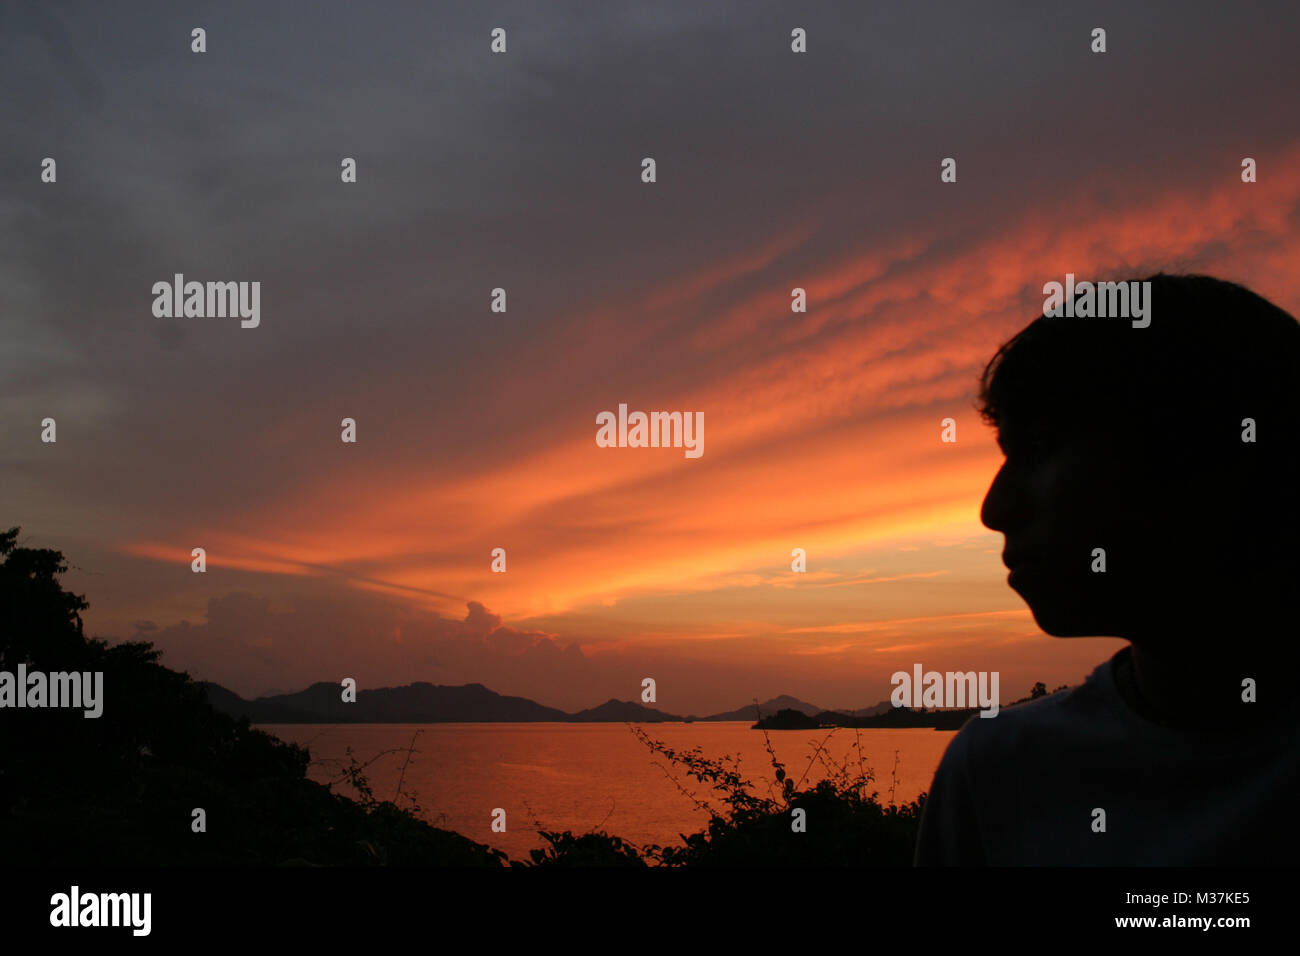 A tourist watches a spectacular sunset over the Batang Ai National Park reservoir, in Sarawak, Borneo,  August 3, 2005 Stock Photo